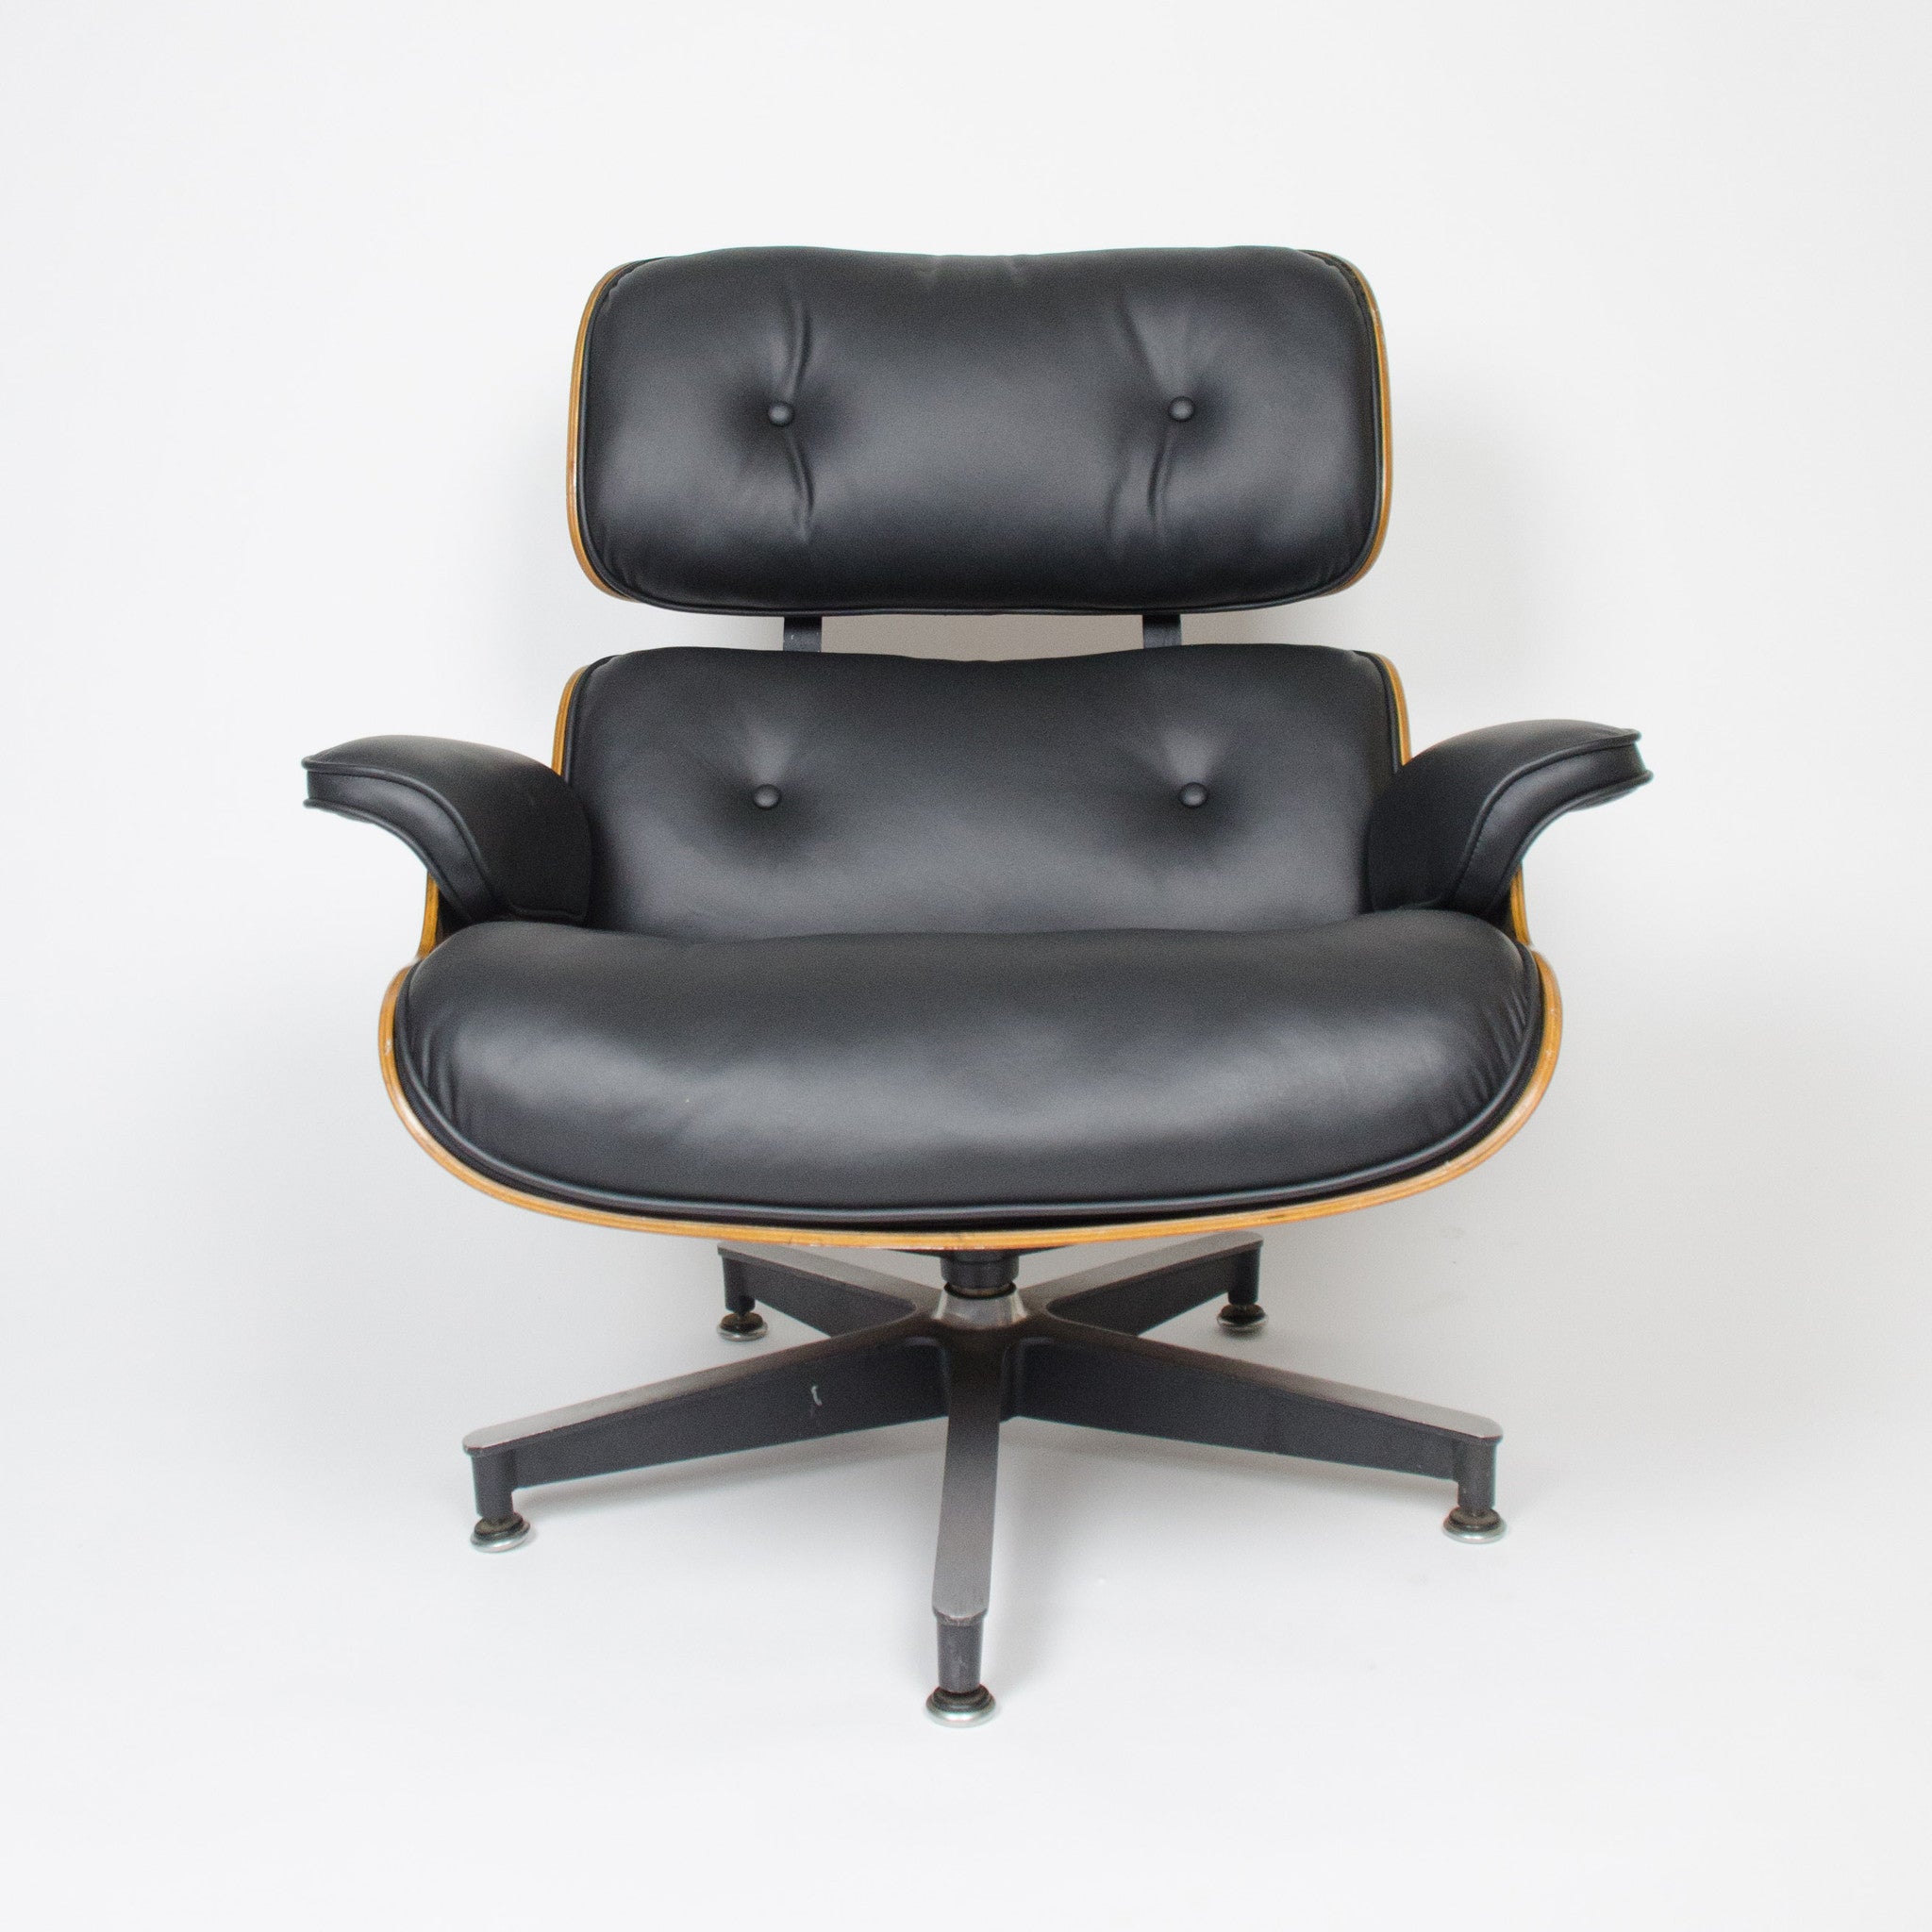 SOLD 1970's Herman Miller Eames Lounge Chair & Ottoman Rosewood 670 671 New Cushions